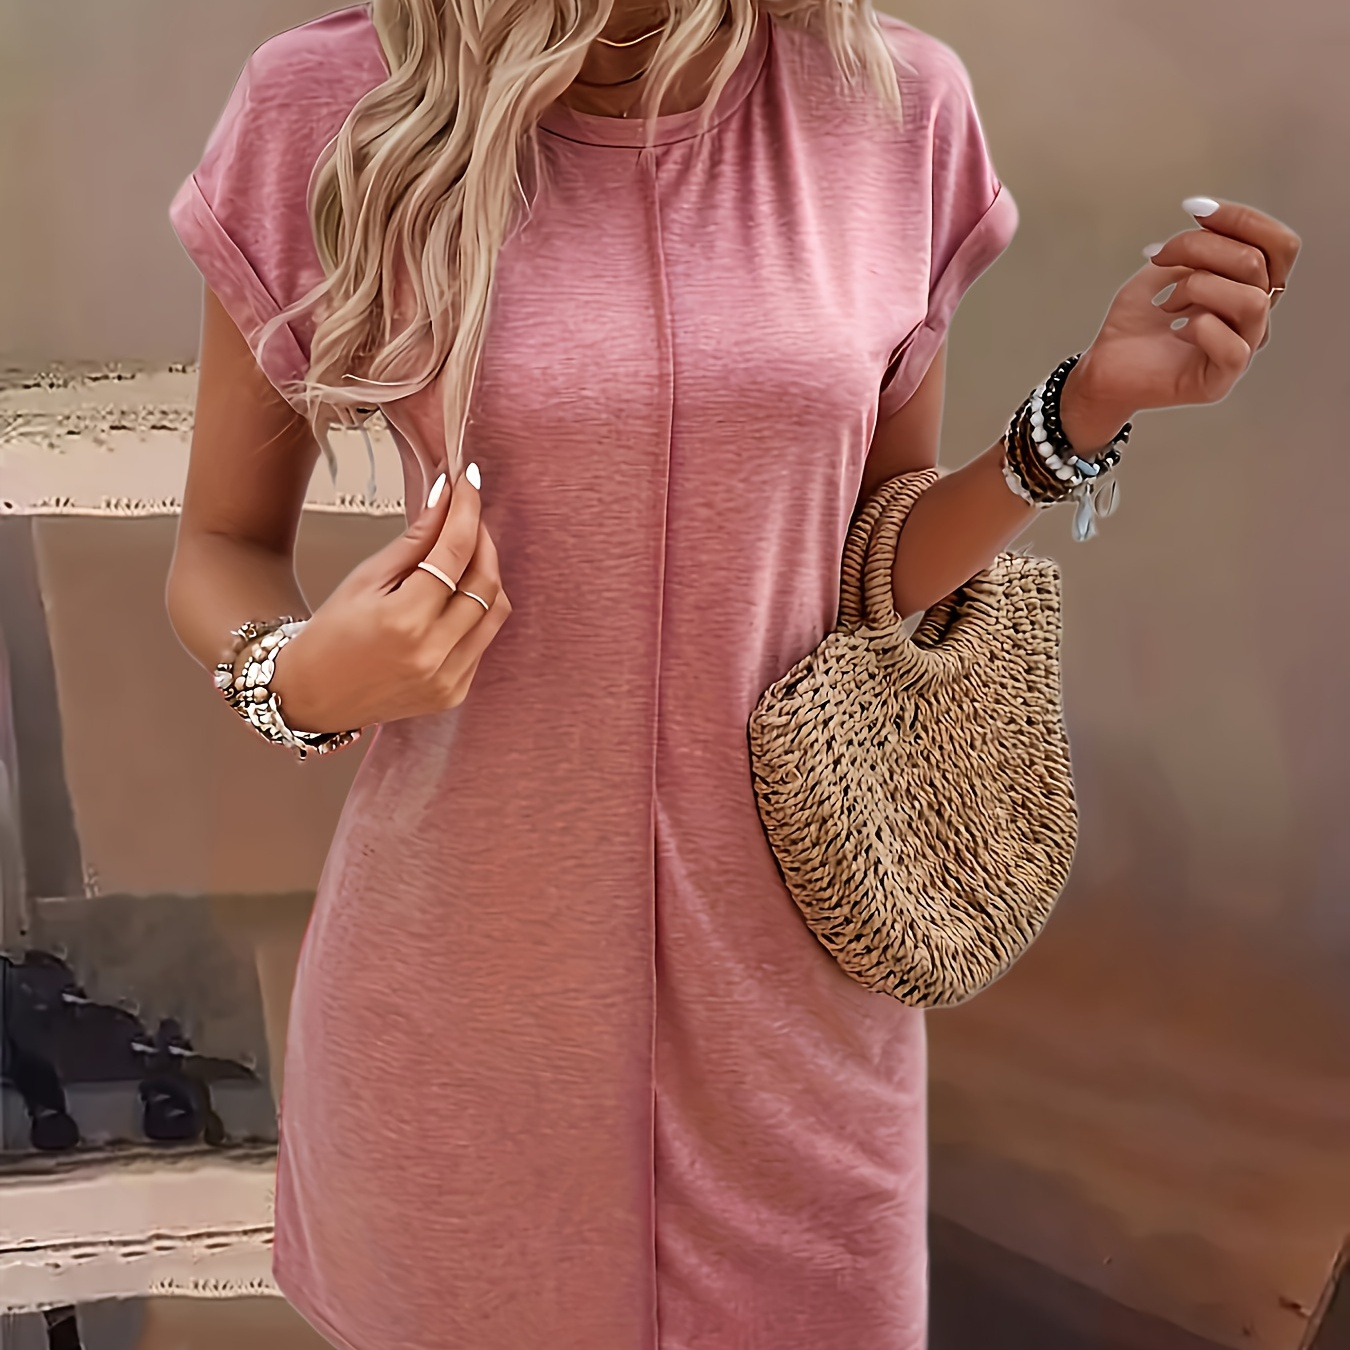 

Top-stitching Crew Neck Dress, Casual Short Sleeve Shift Dress For Spring & Summer, Women's Clothing